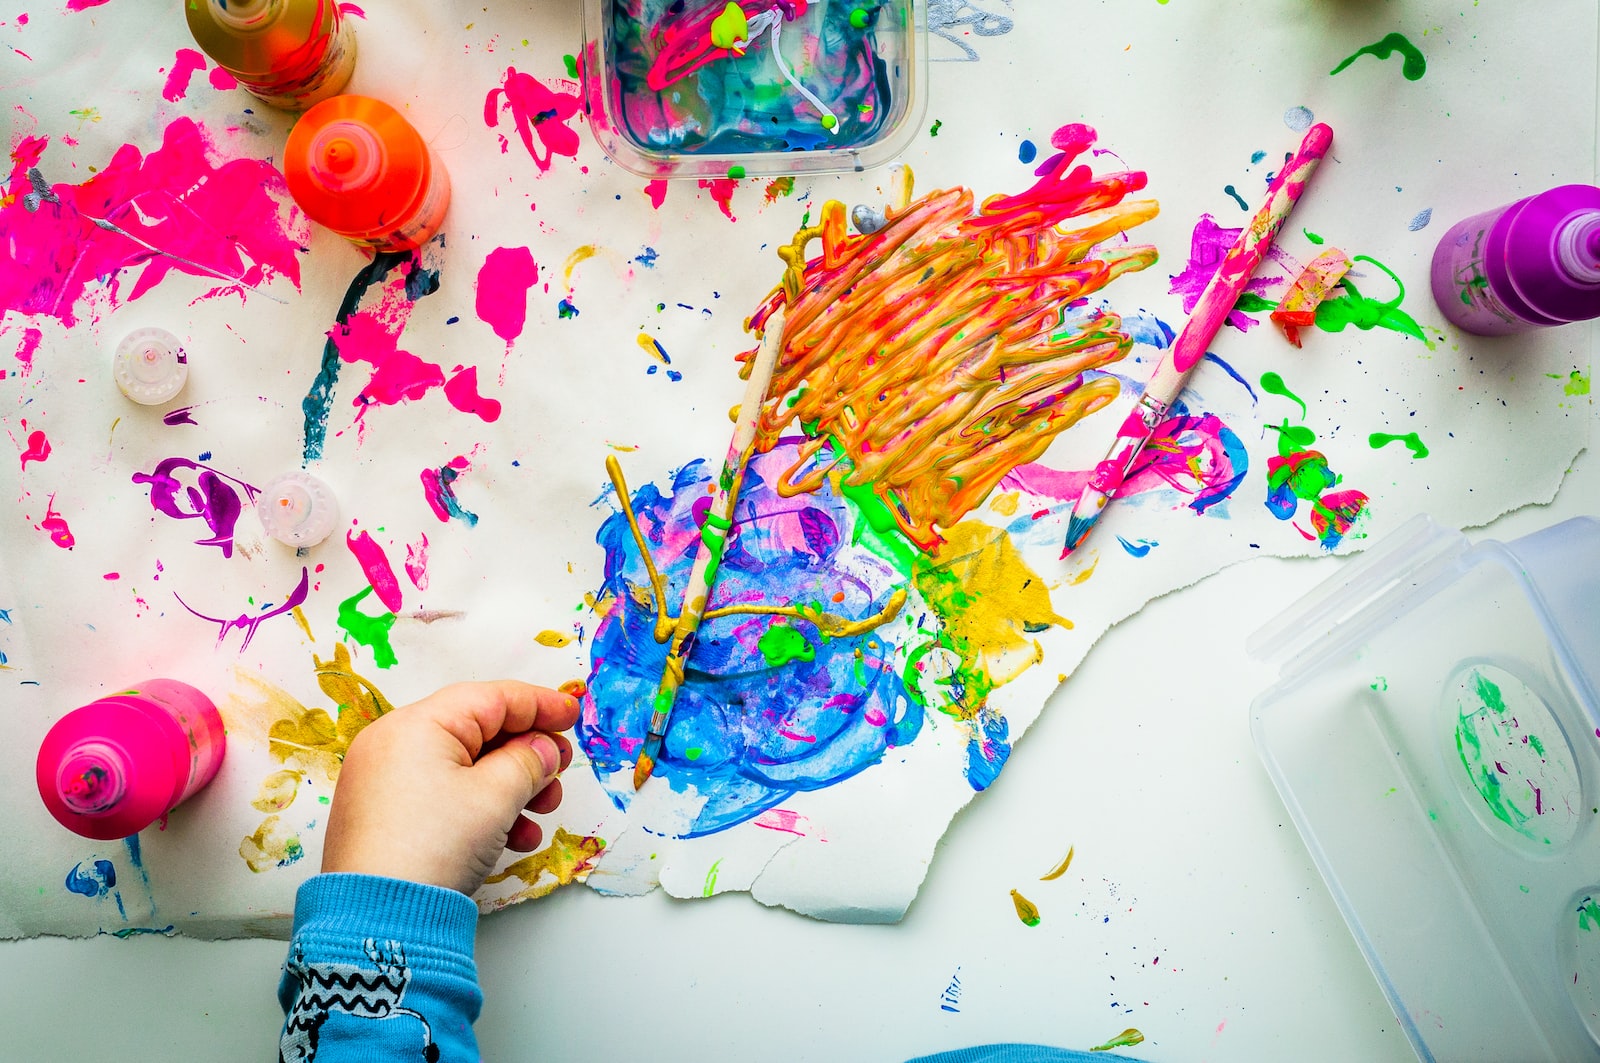 A view of a kids painting on a desk